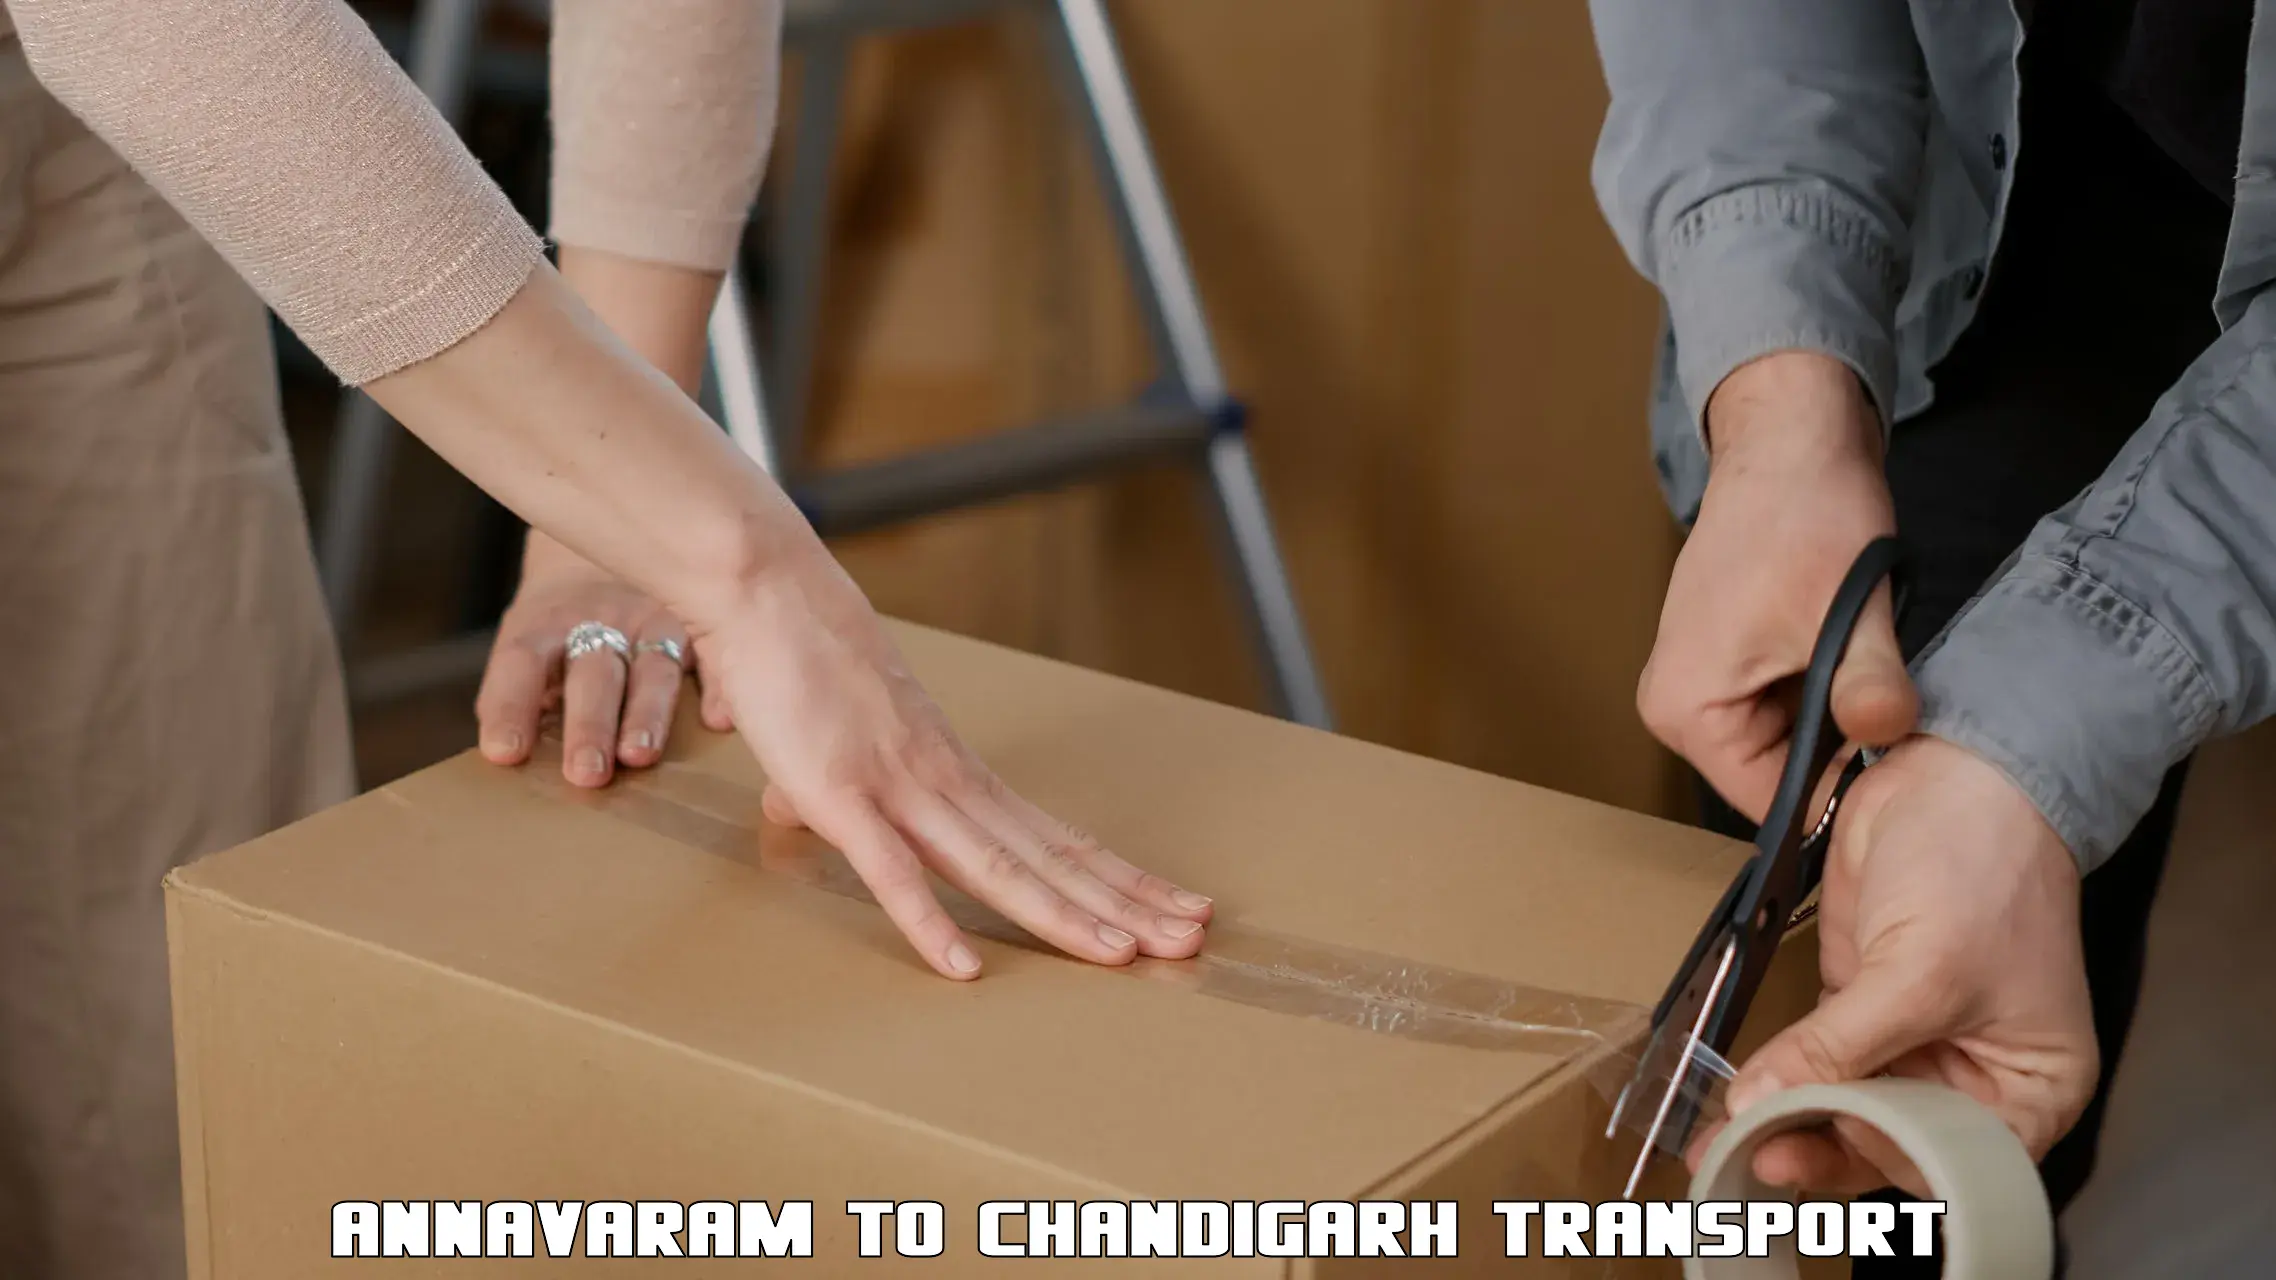 Transport bike from one state to another Annavaram to Chandigarh